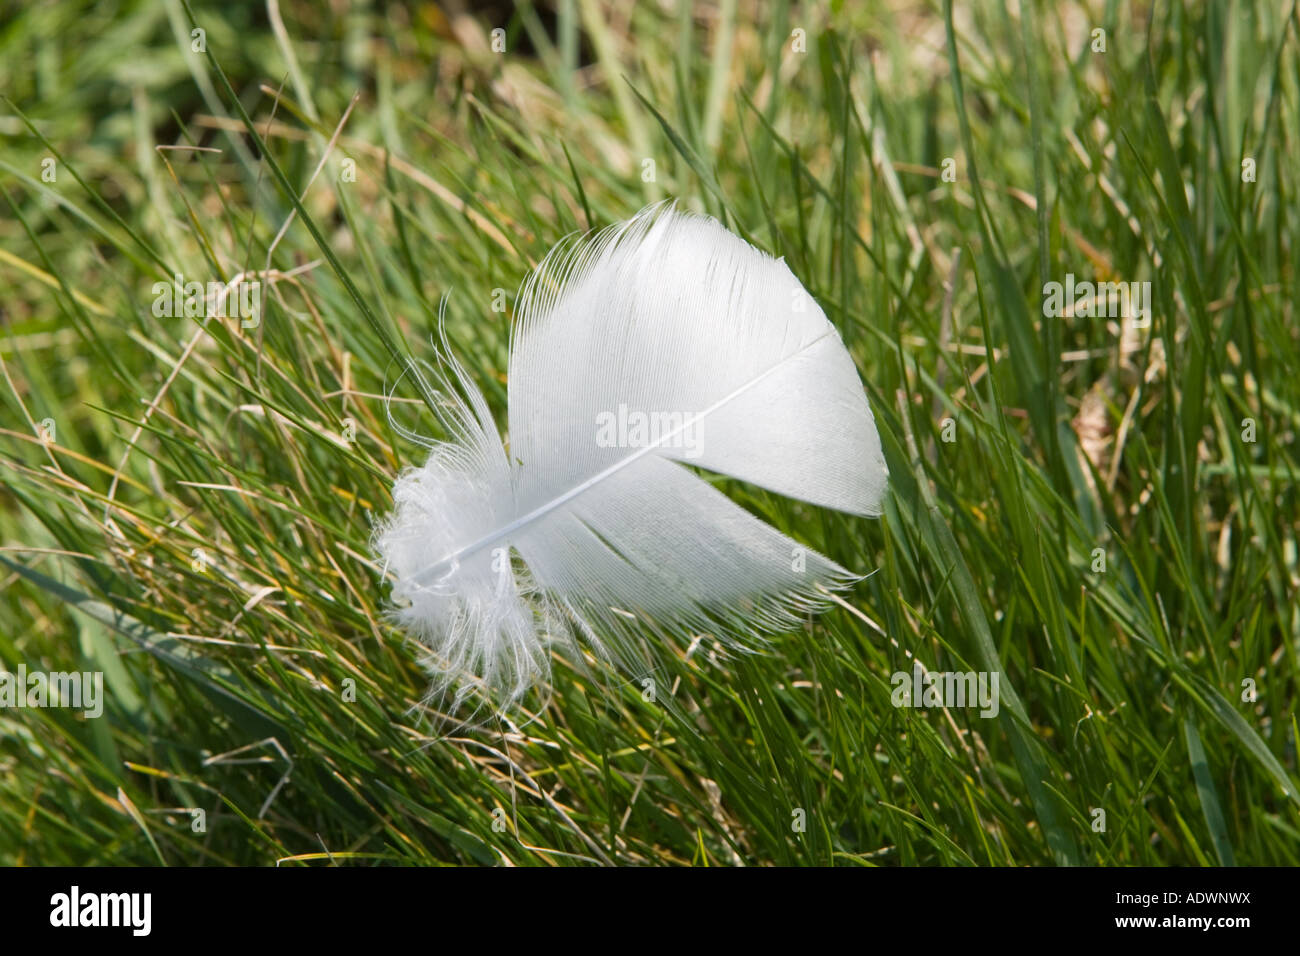 Feather from a mute swan discarded on grass Donnington Gloucestershire United Kingdom Stock Photo